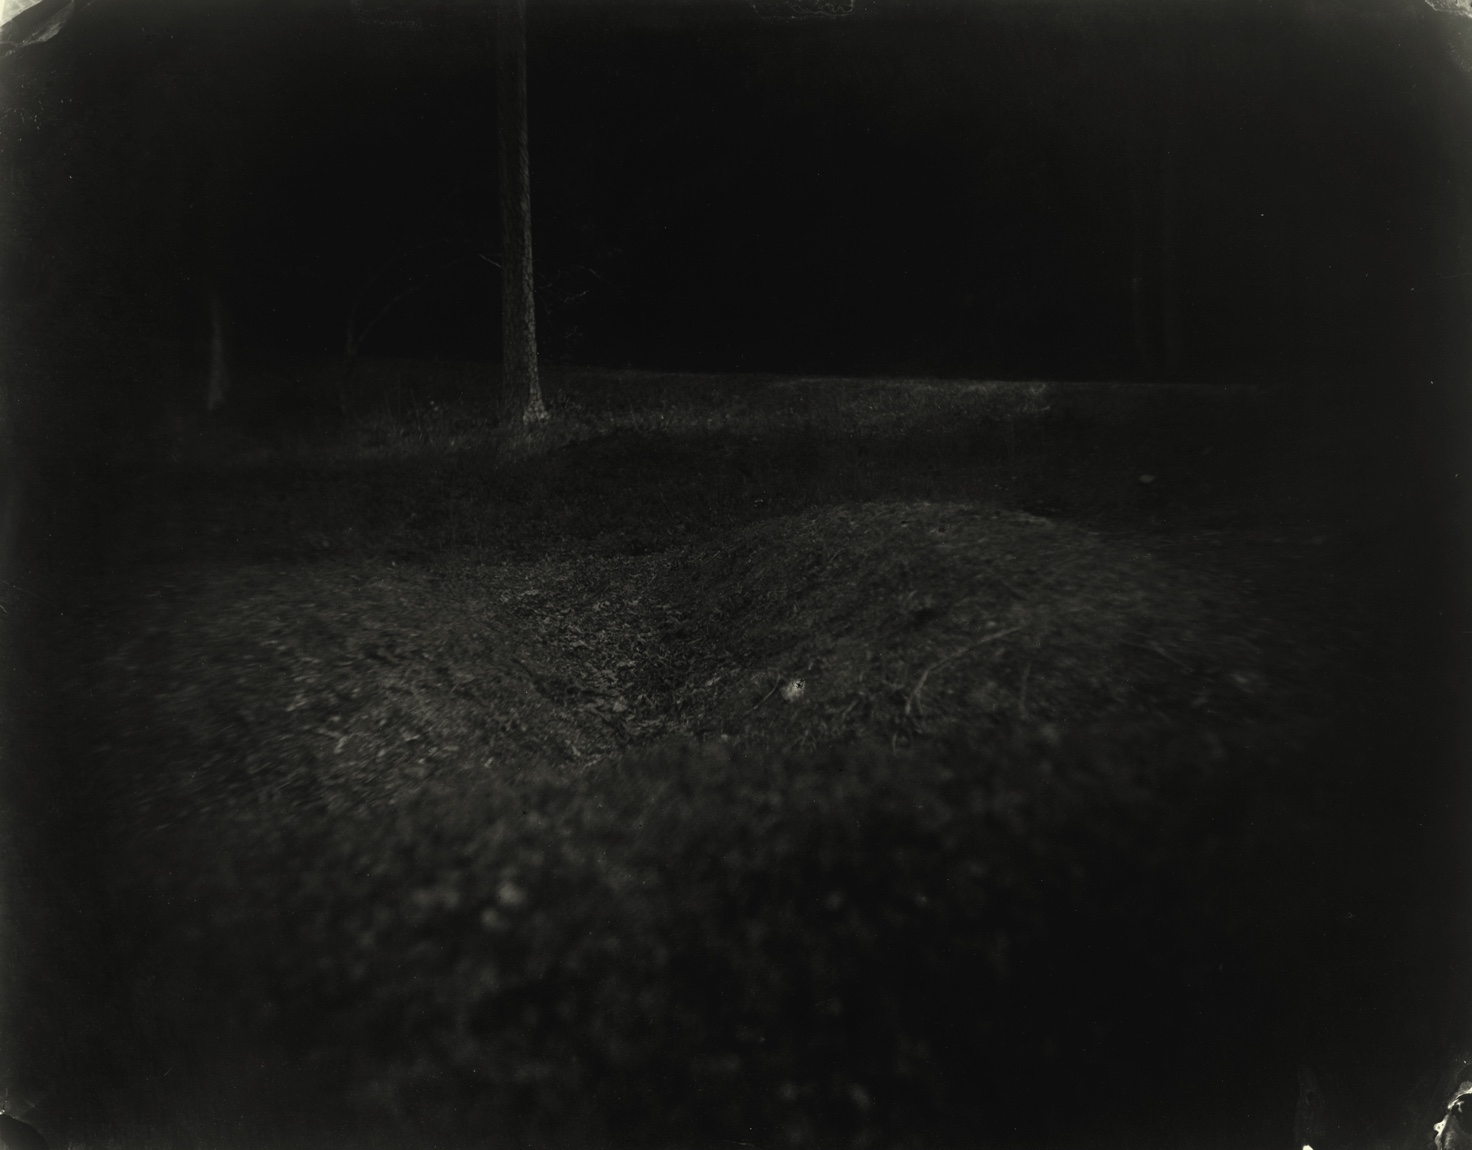 Sally Mann, Untitled (Antietam #14, trenches) from the series Battlefields, 2001